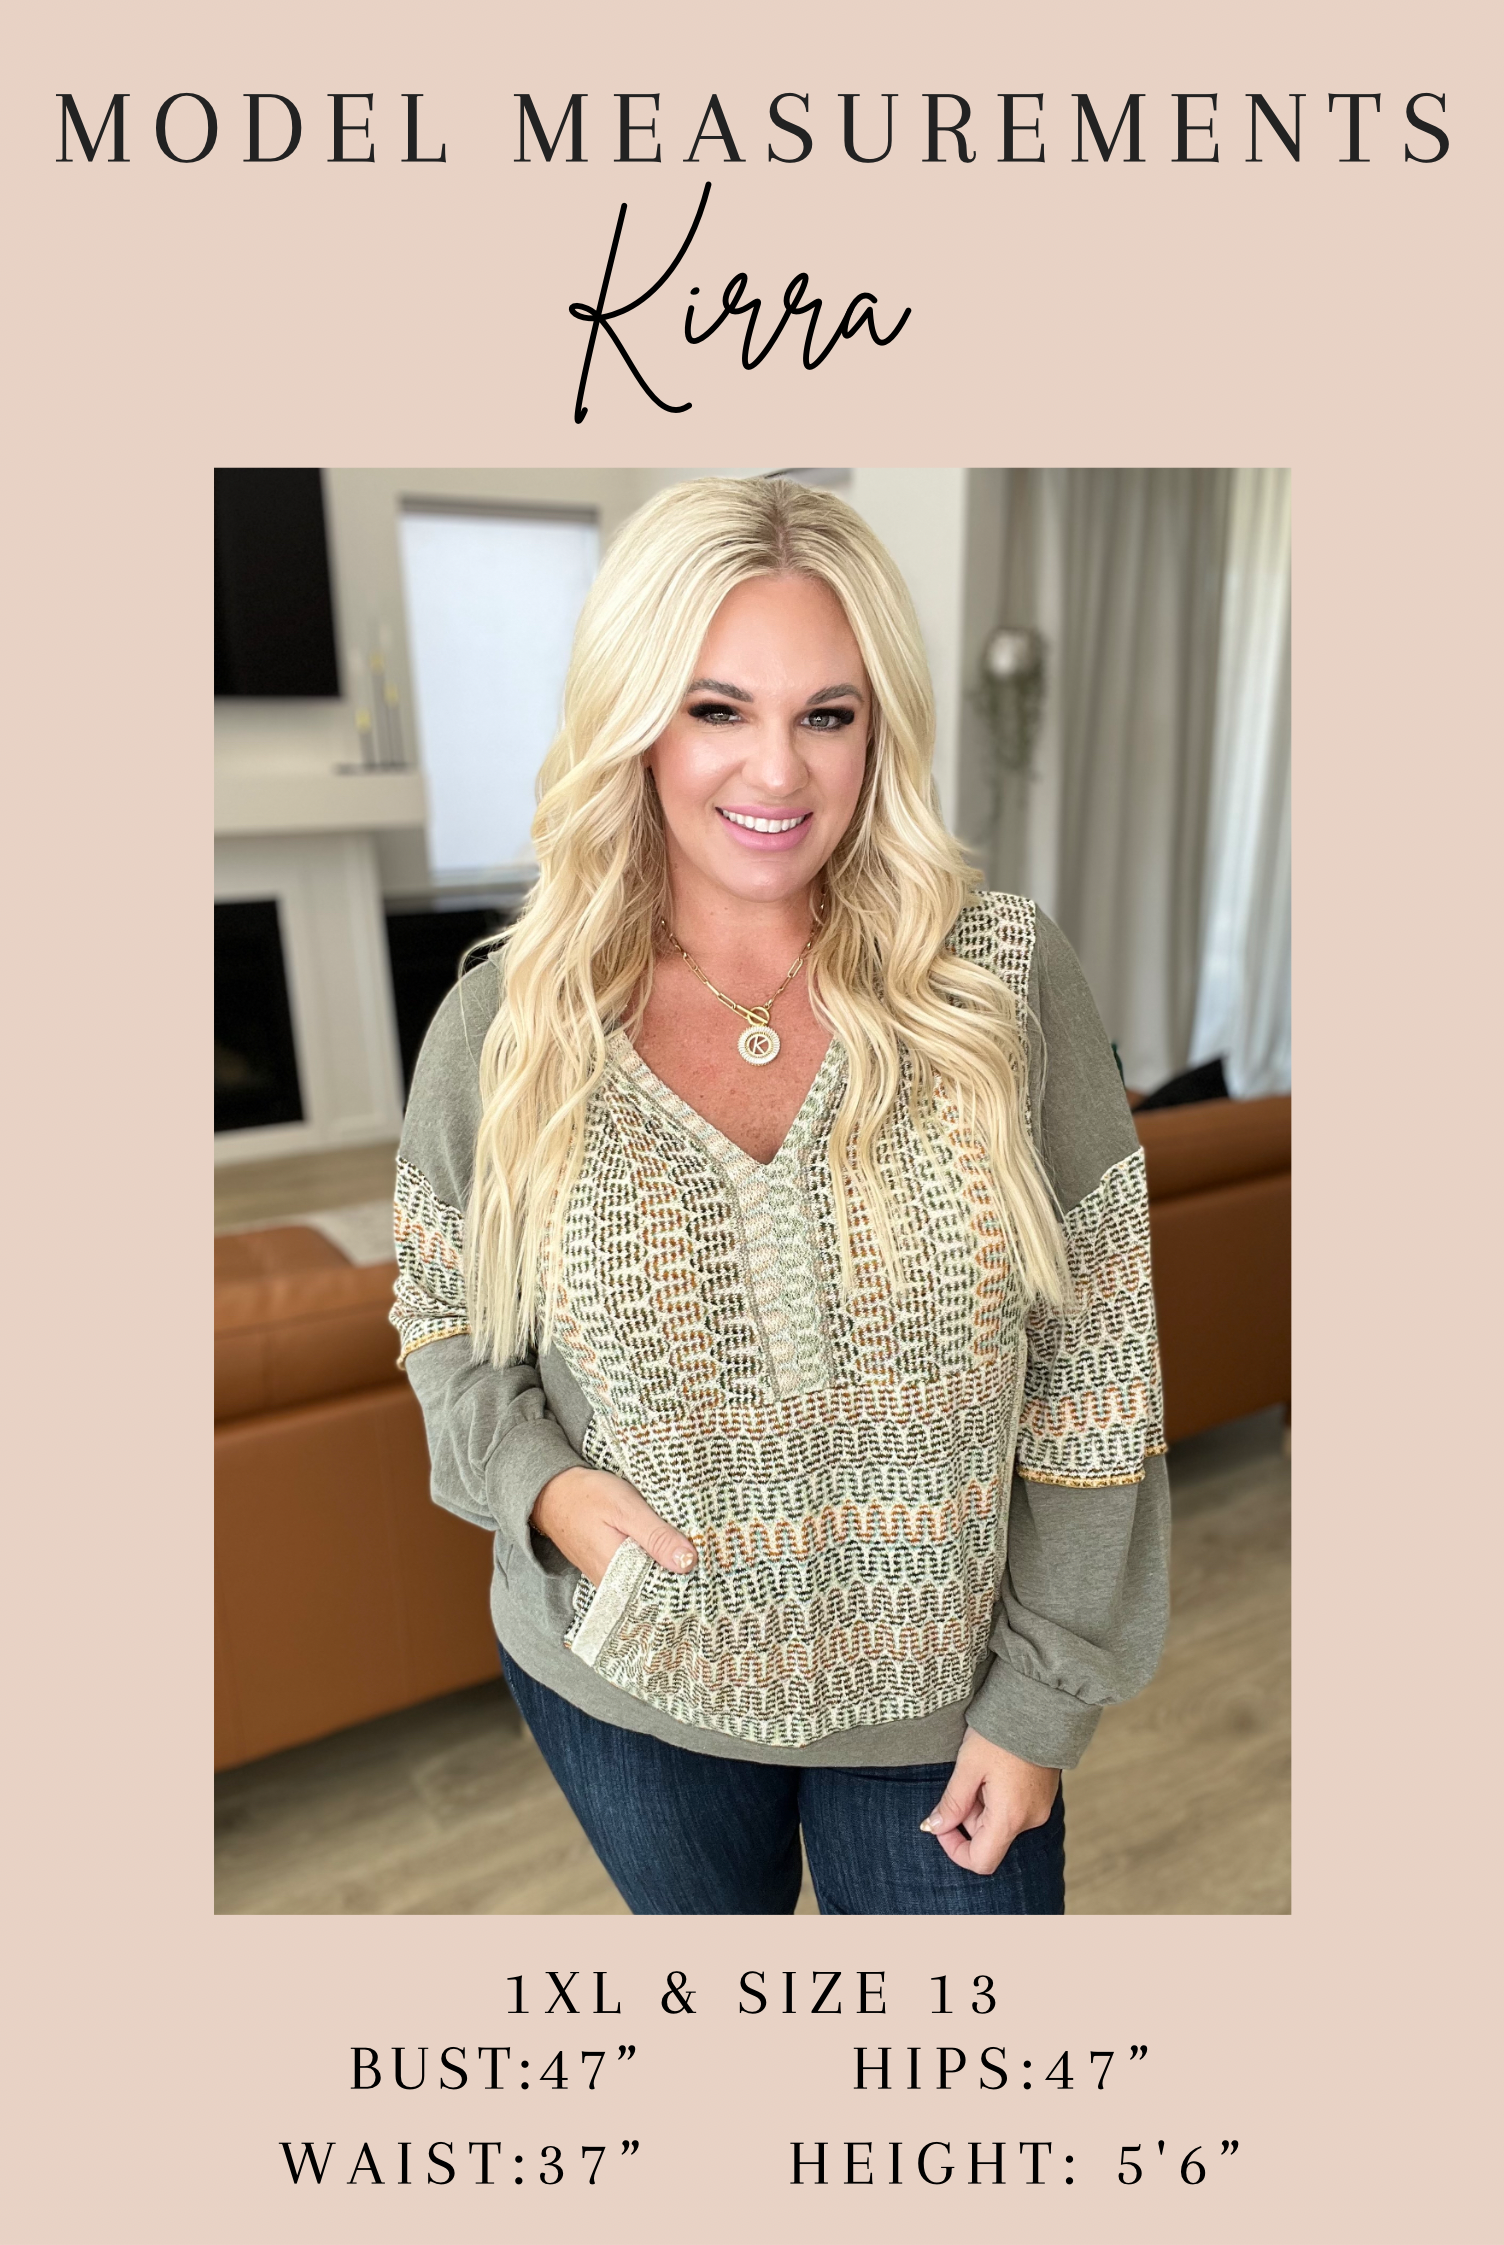 Lizzy Top in Teal and Magenta Damask-Long Sleeve Tops-Krush Kandy, Women's Online Fashion Boutique Located in Phoenix, Arizona (Scottsdale Area)